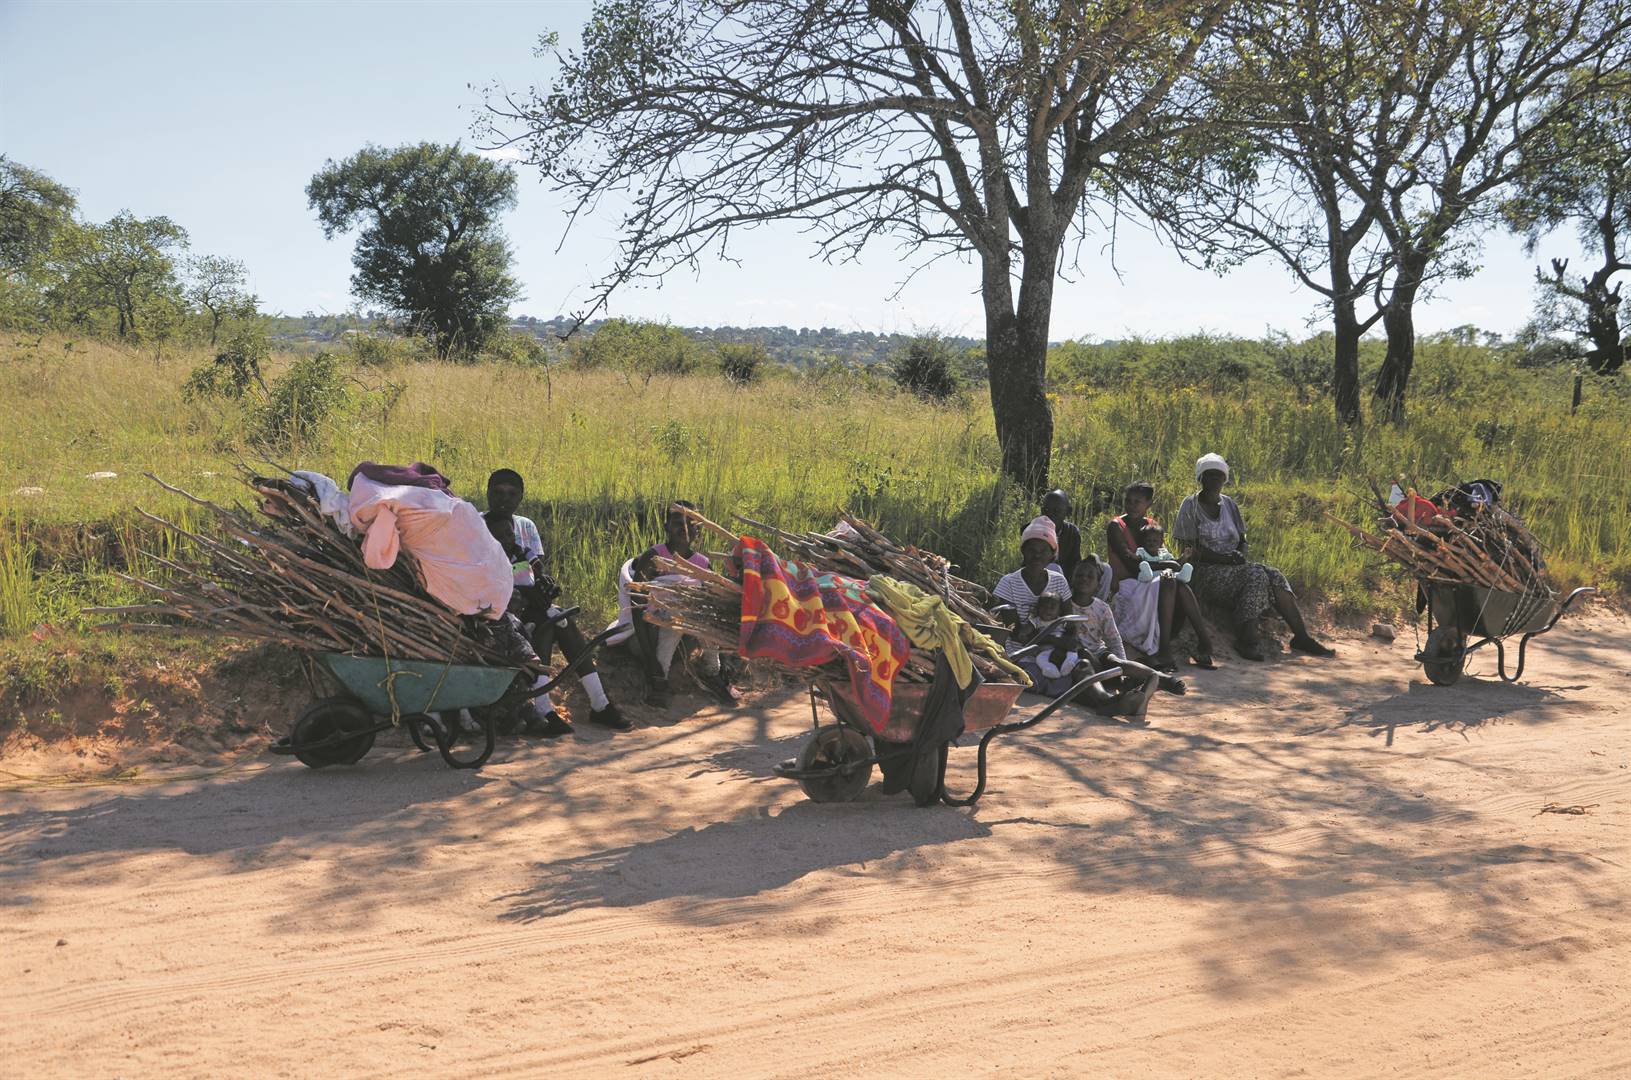 Poor mums Anitjie Mhangana, Thobile Mathebula and Luzile Mogale, sitting with their babies and their other kids, walk through the dangerous bushes looking for firewood to cook.